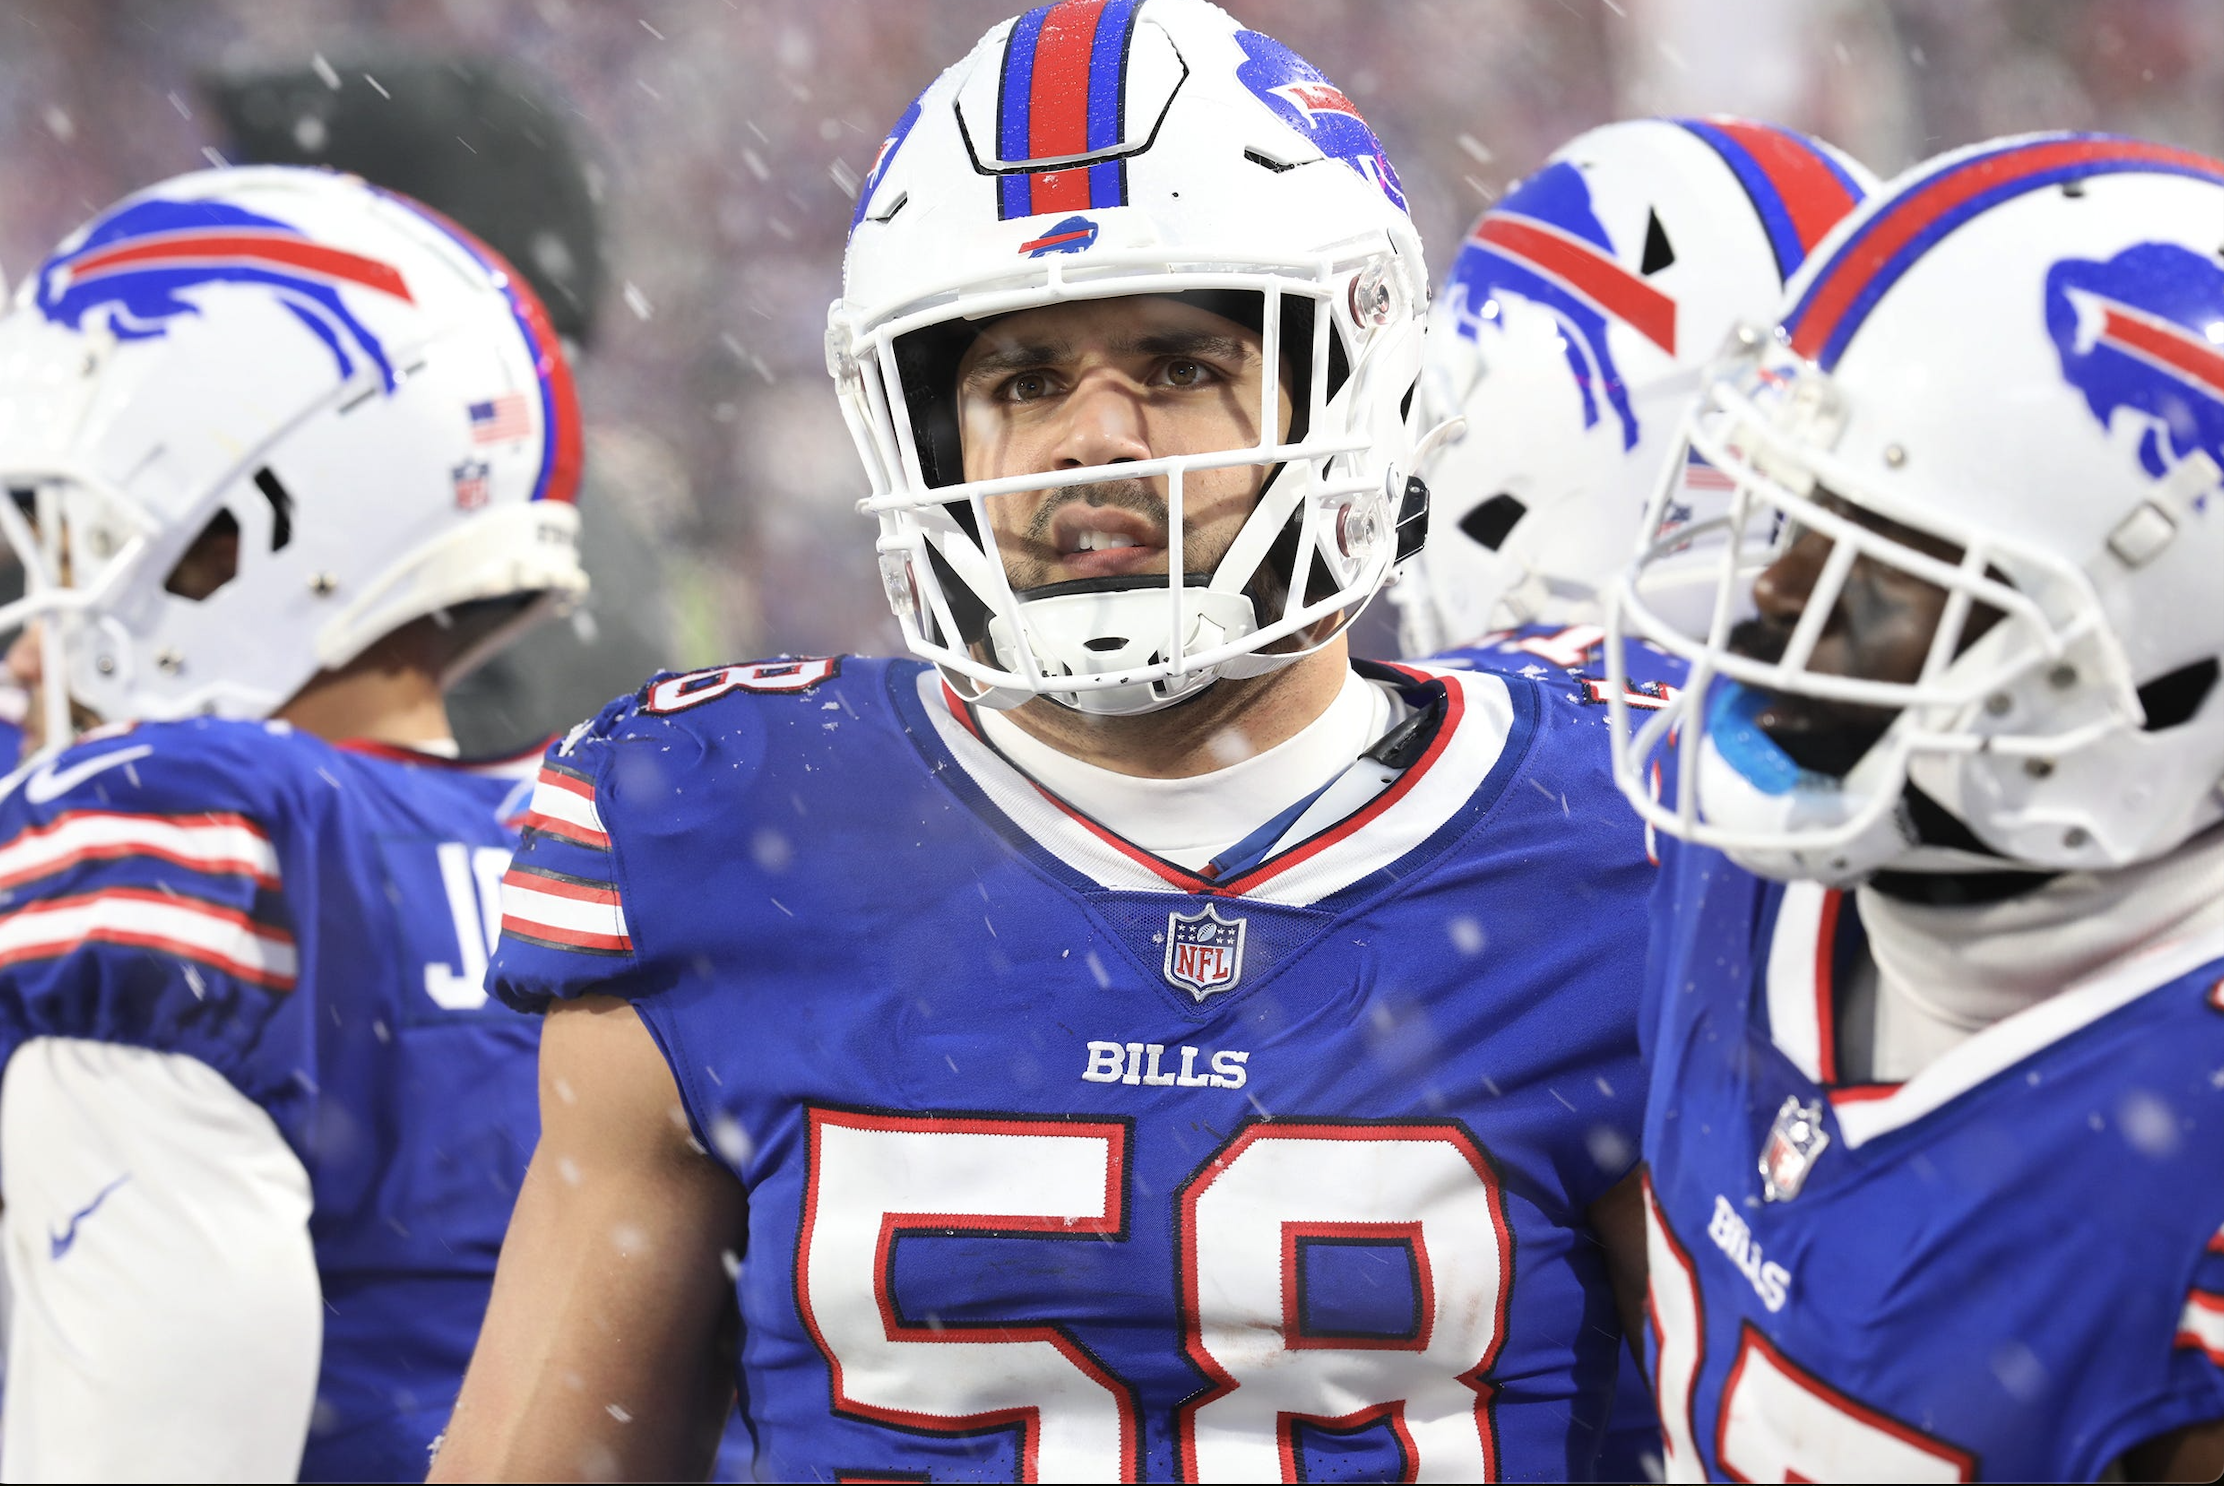 WYO’s Field Notes #9: Bills’ Defense May Take Time to Gel